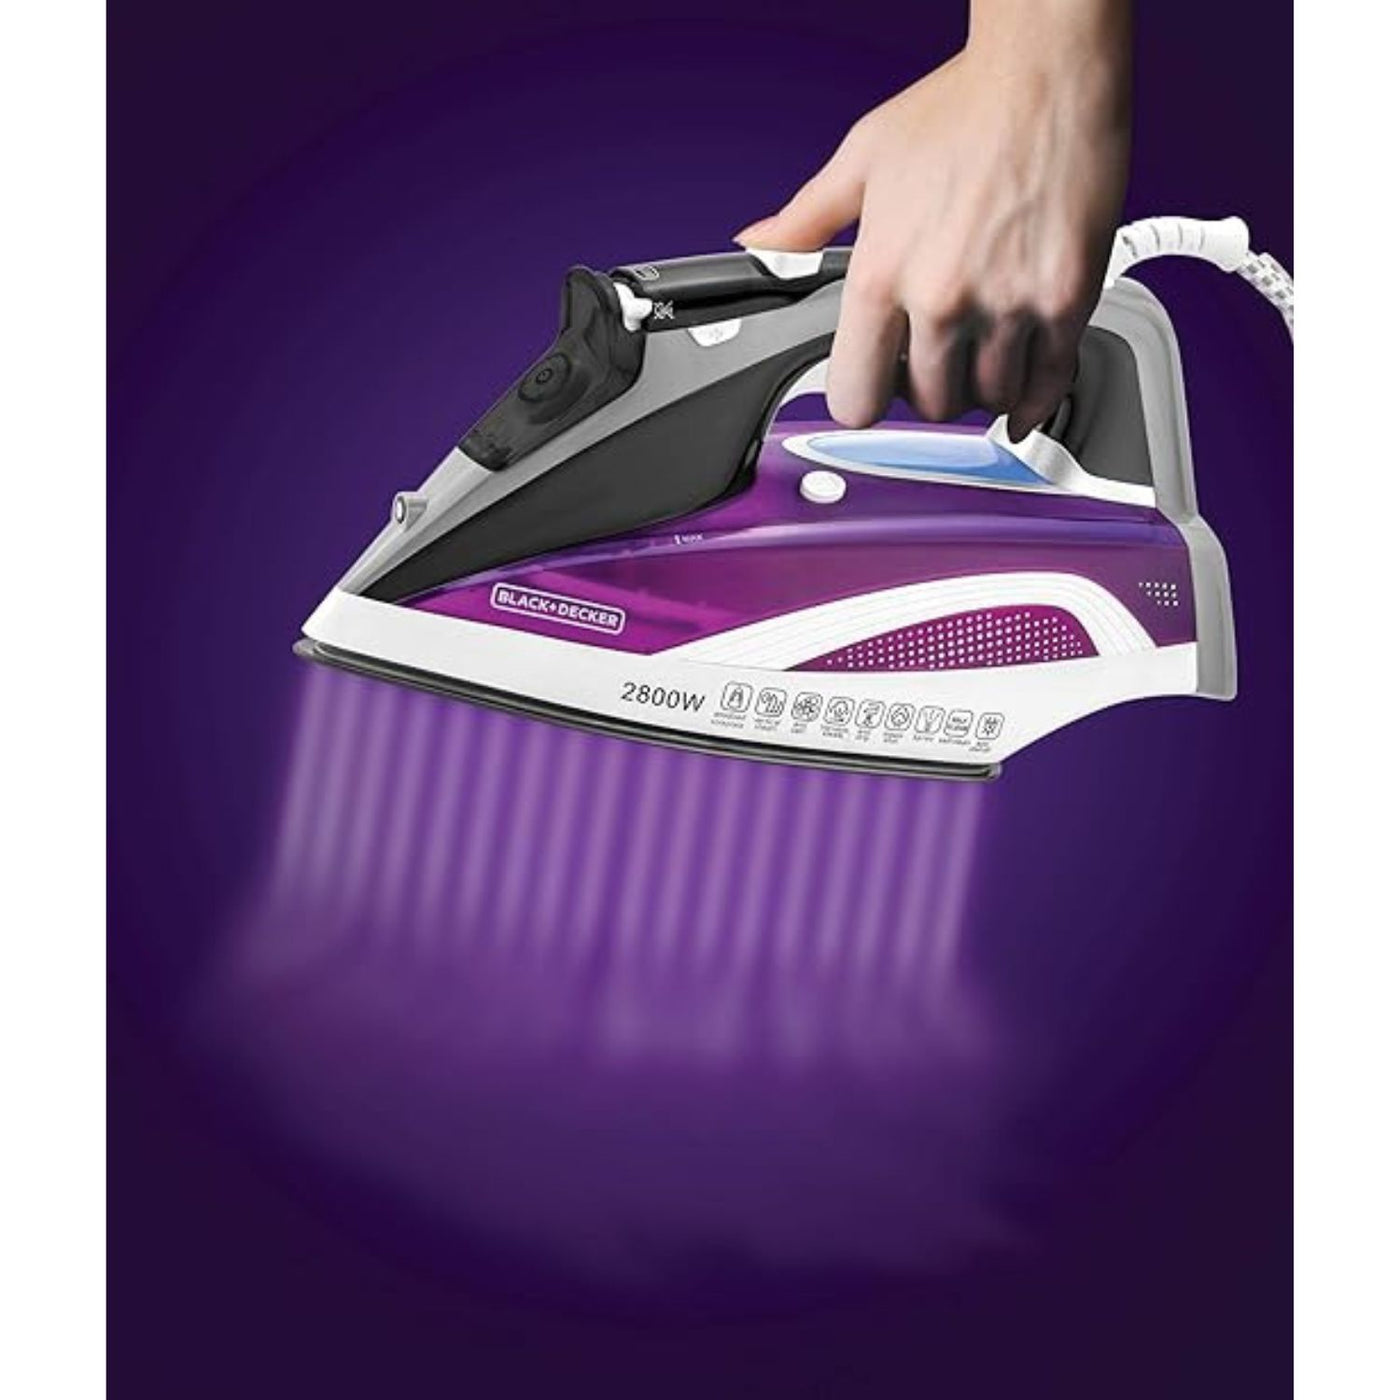 2800W Digital Pre-Programmed Steam Iron, Anodized Sole Plate with Eco Mode, Multicolour